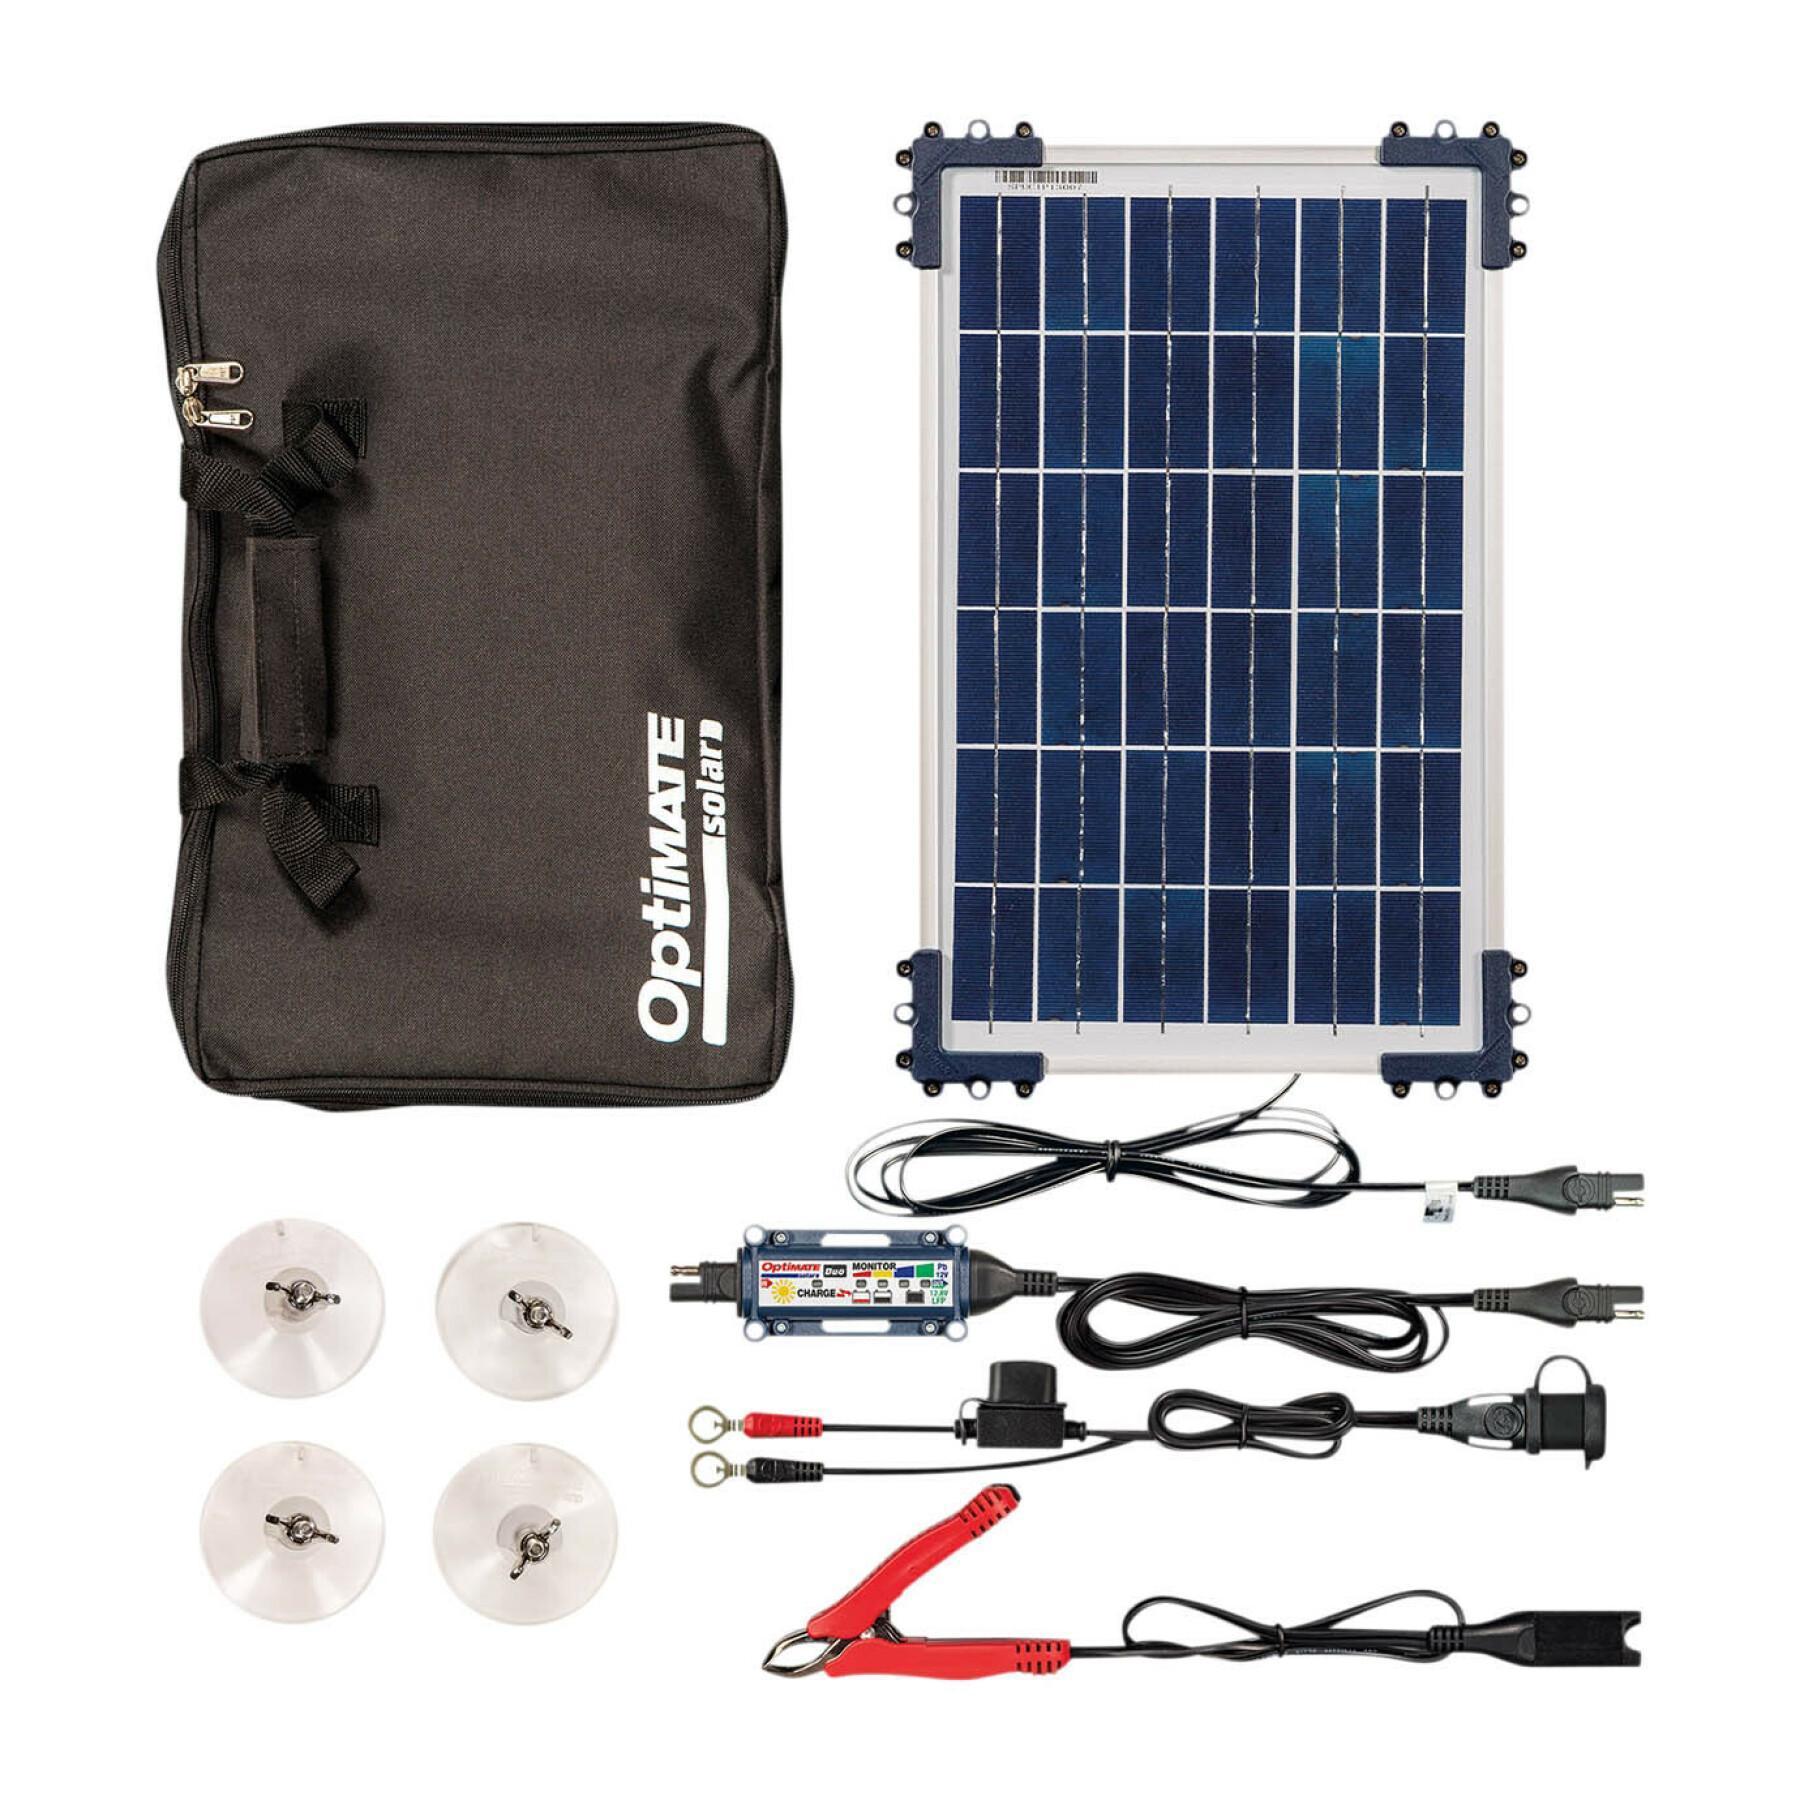 Solar battery charger Tecmate DUO TRVL